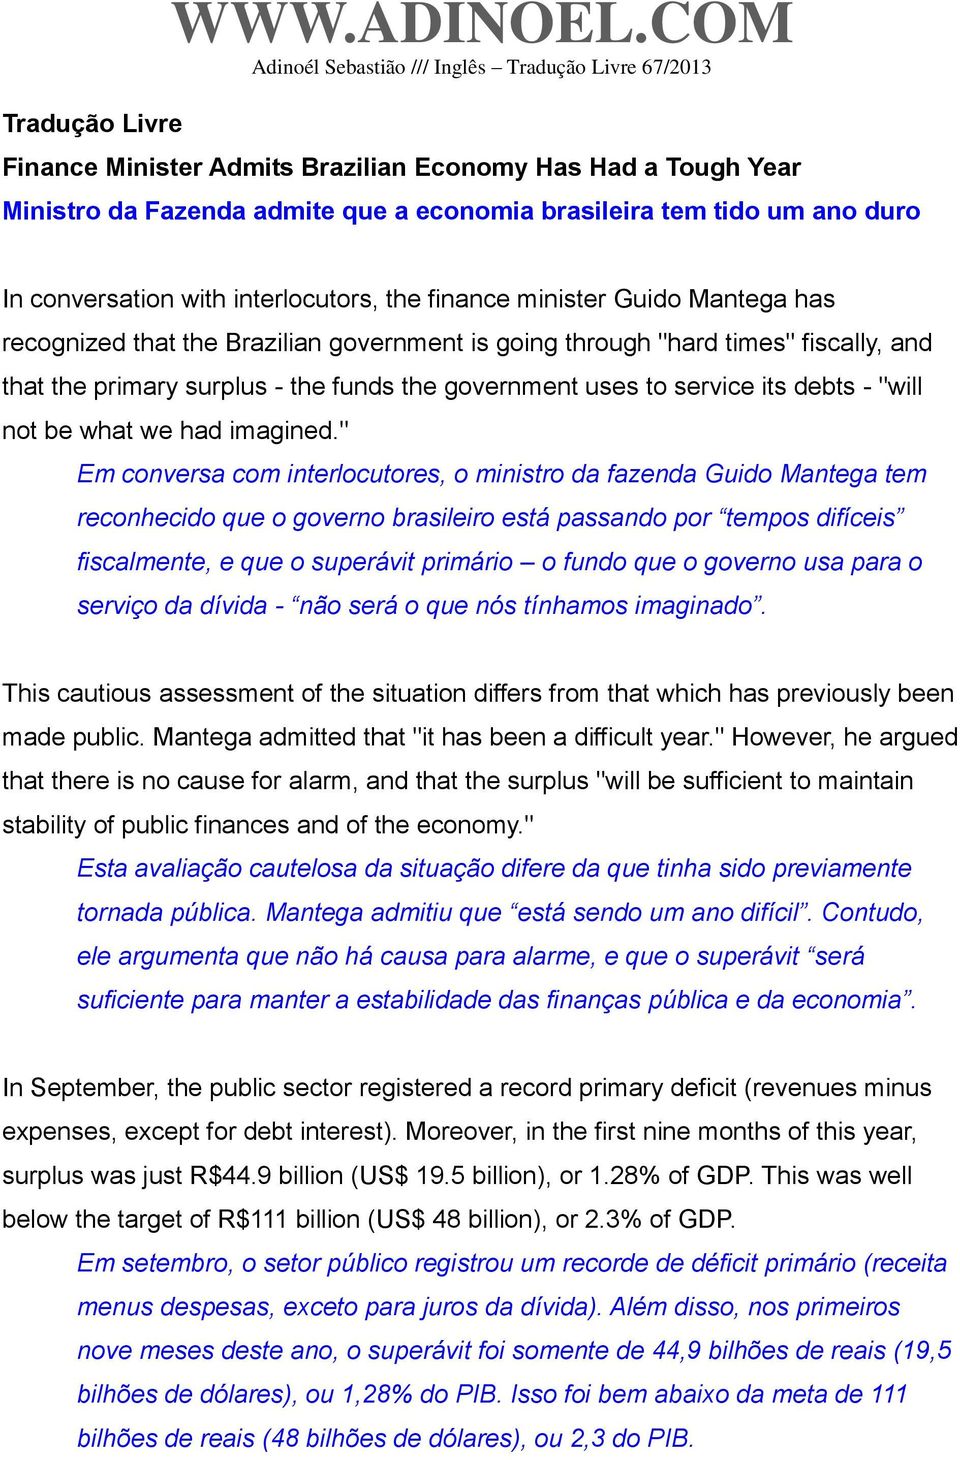 Guido Mantega has recognized that the Brazilian government is going through "hard times" fiscally, and that the primary surplus - the funds the government uses to service its debts - "will not be